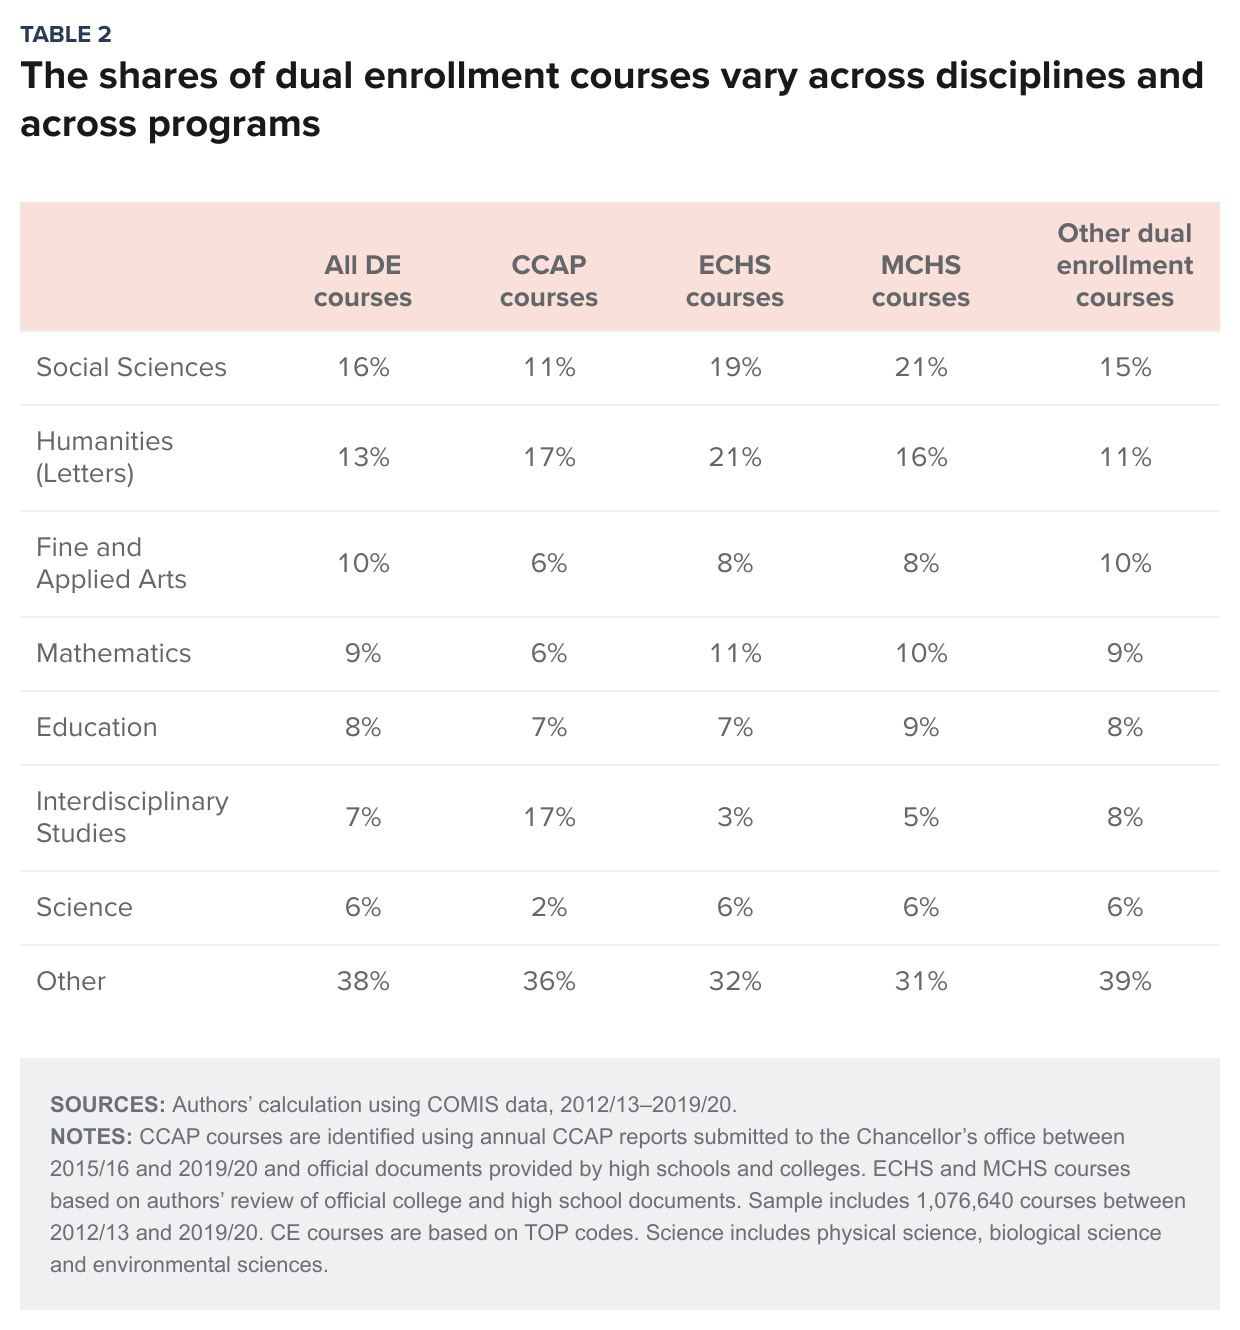 table 2 - The shares of dual enrollment courses vary across disciplines and across programs